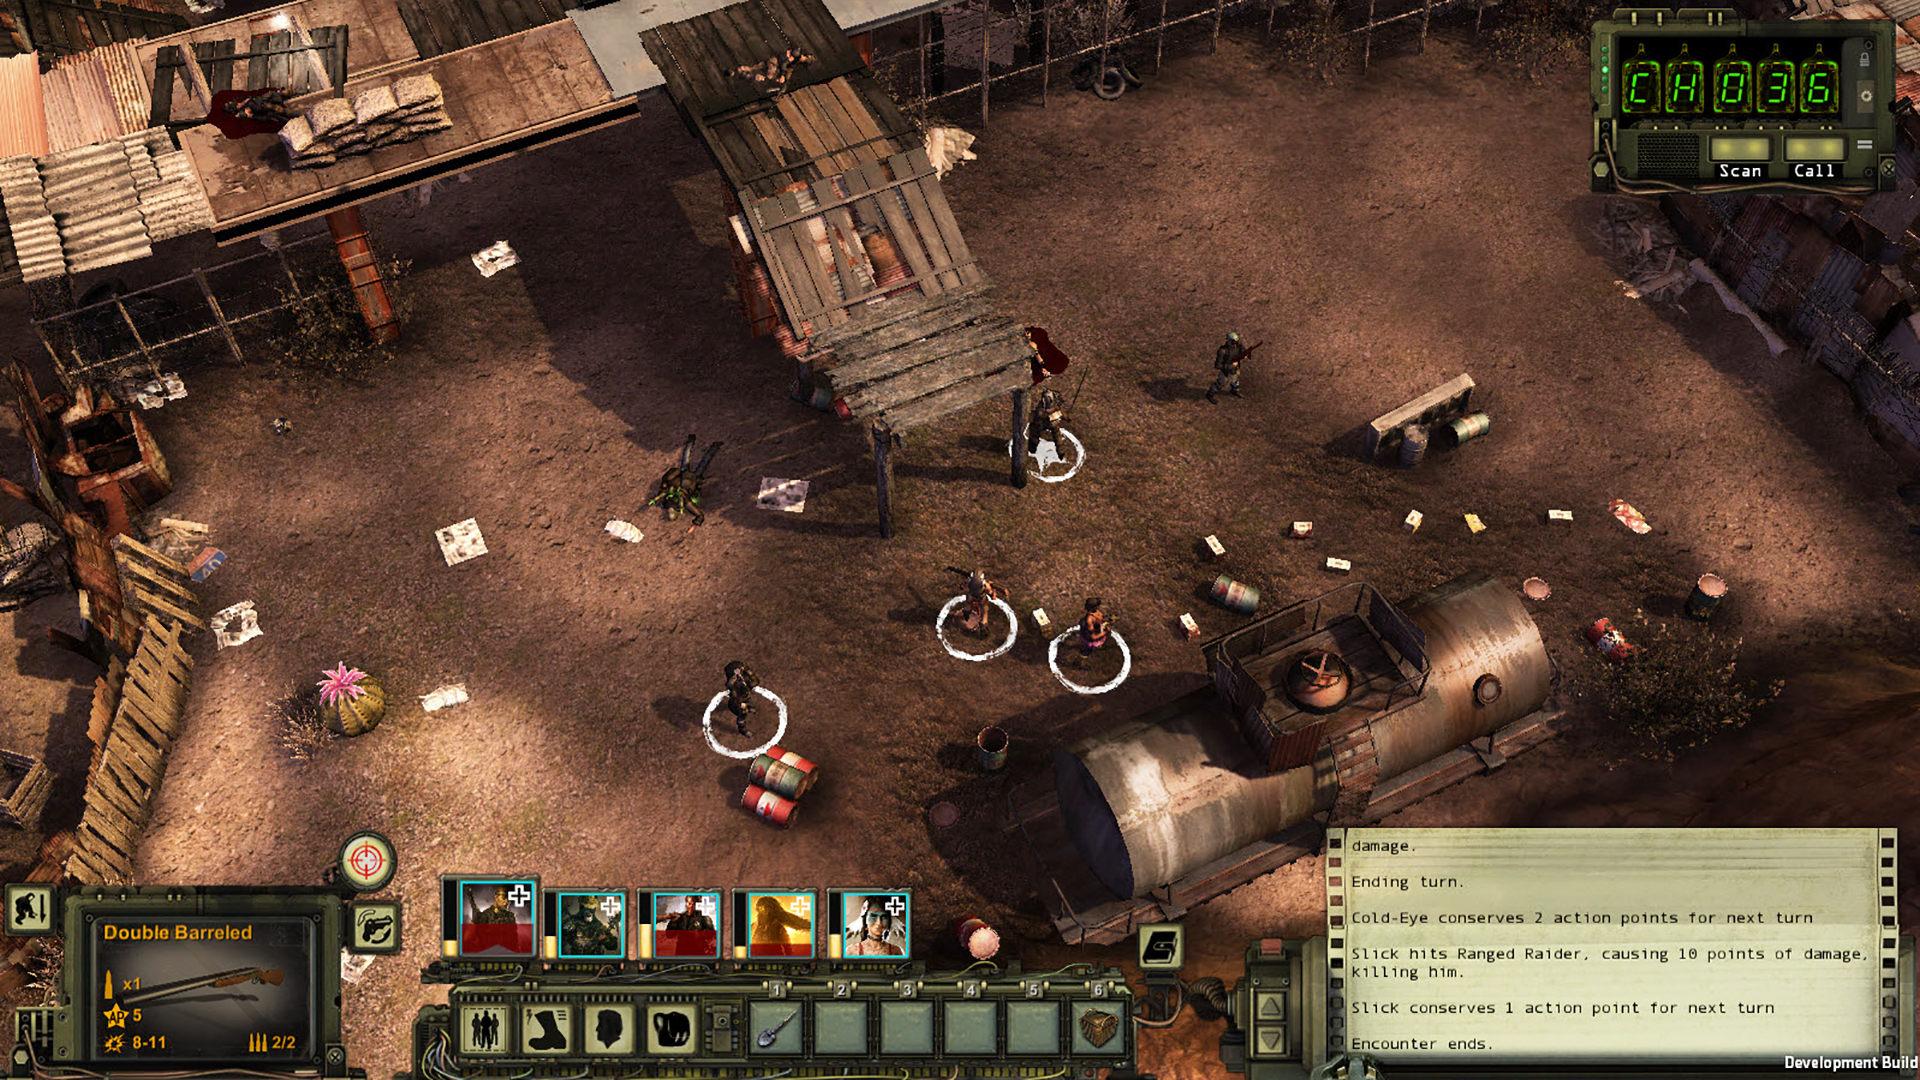 Why You Should Care About Wasteland 2